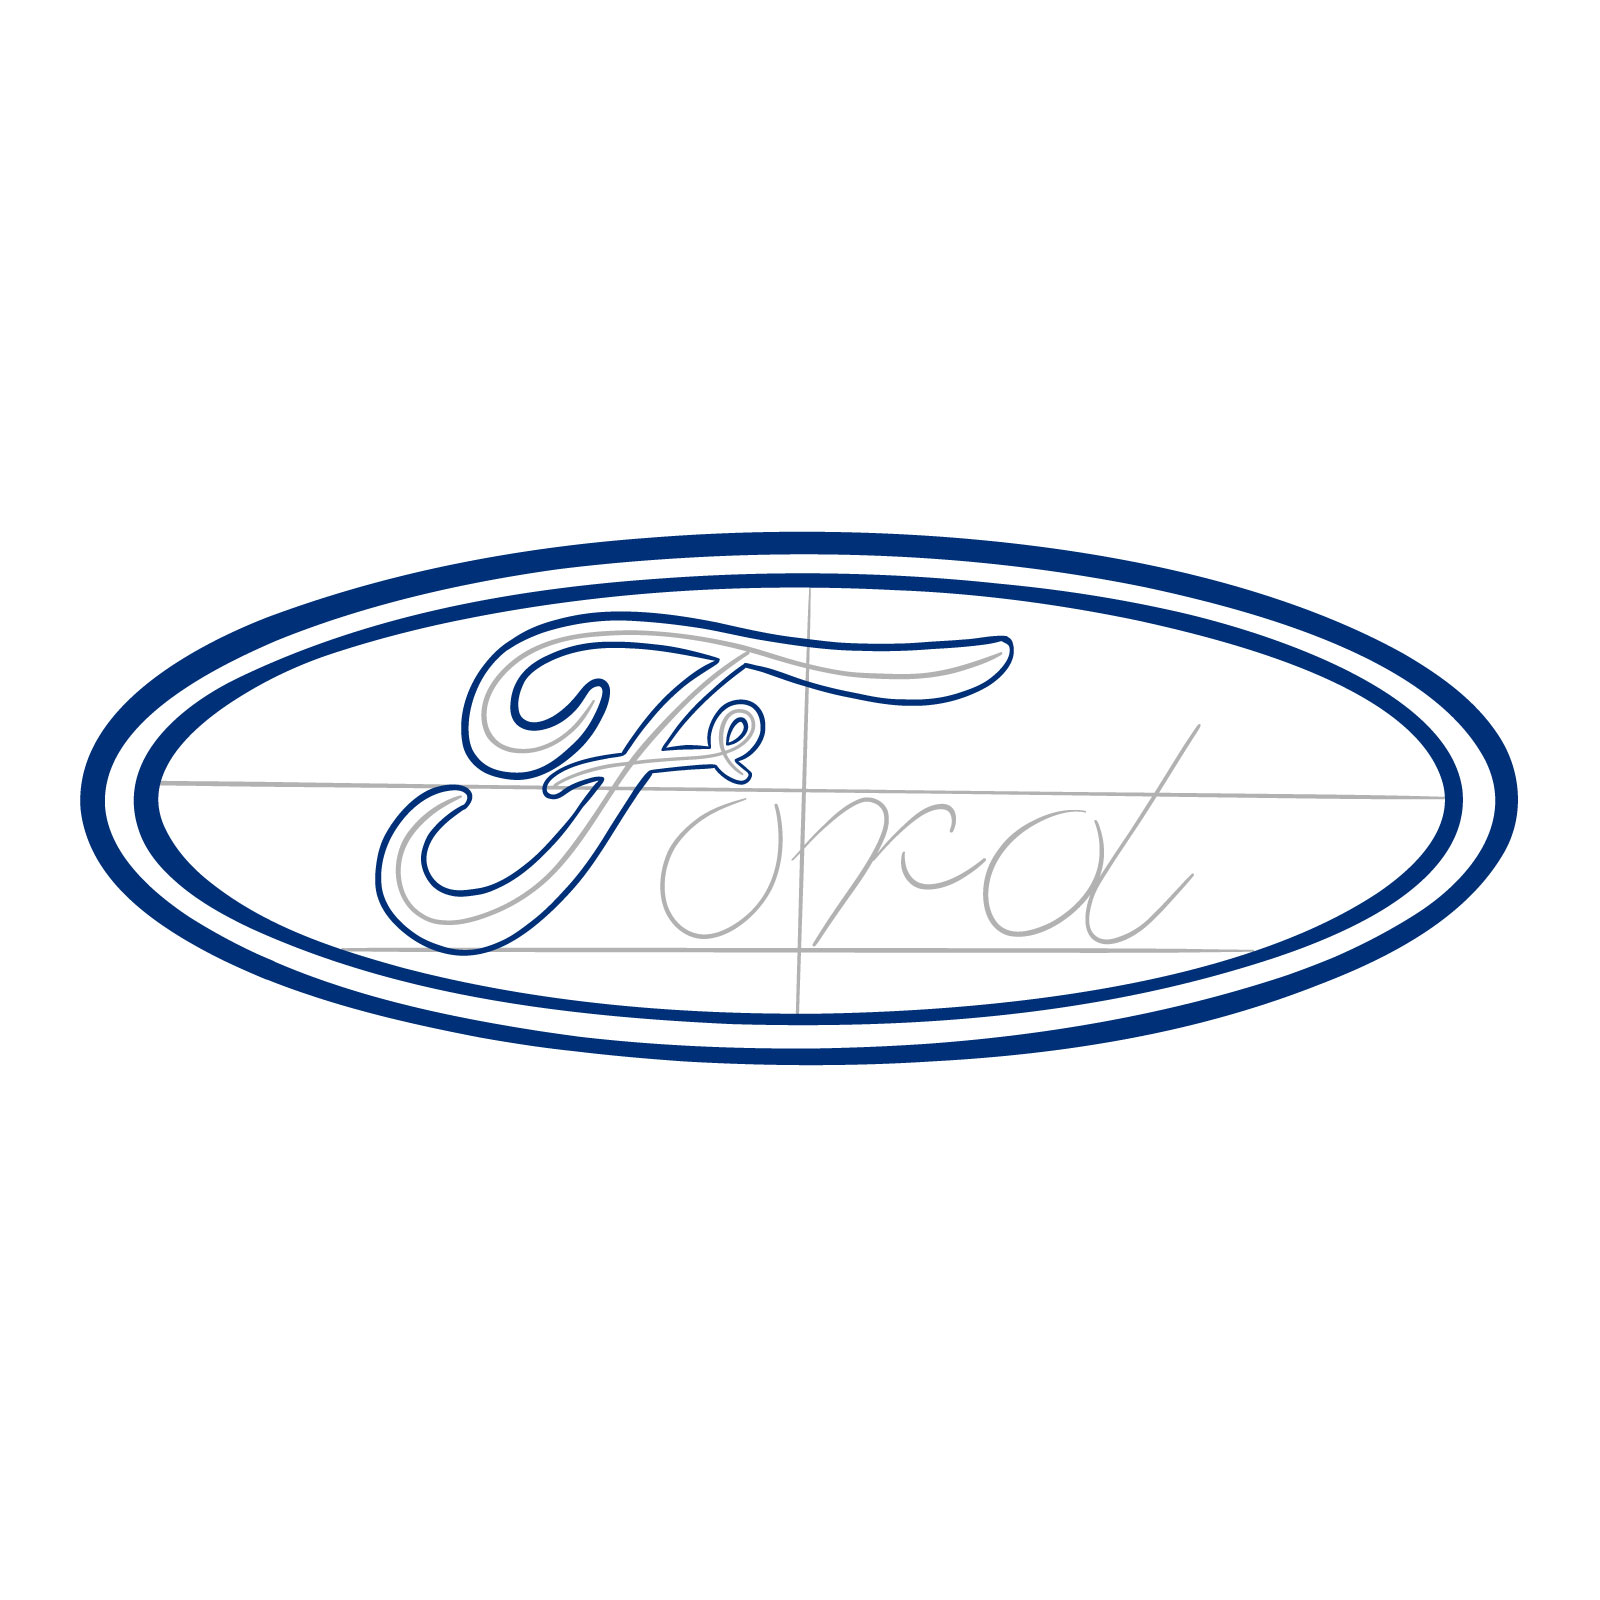 How to draw the Ford logo - step 07